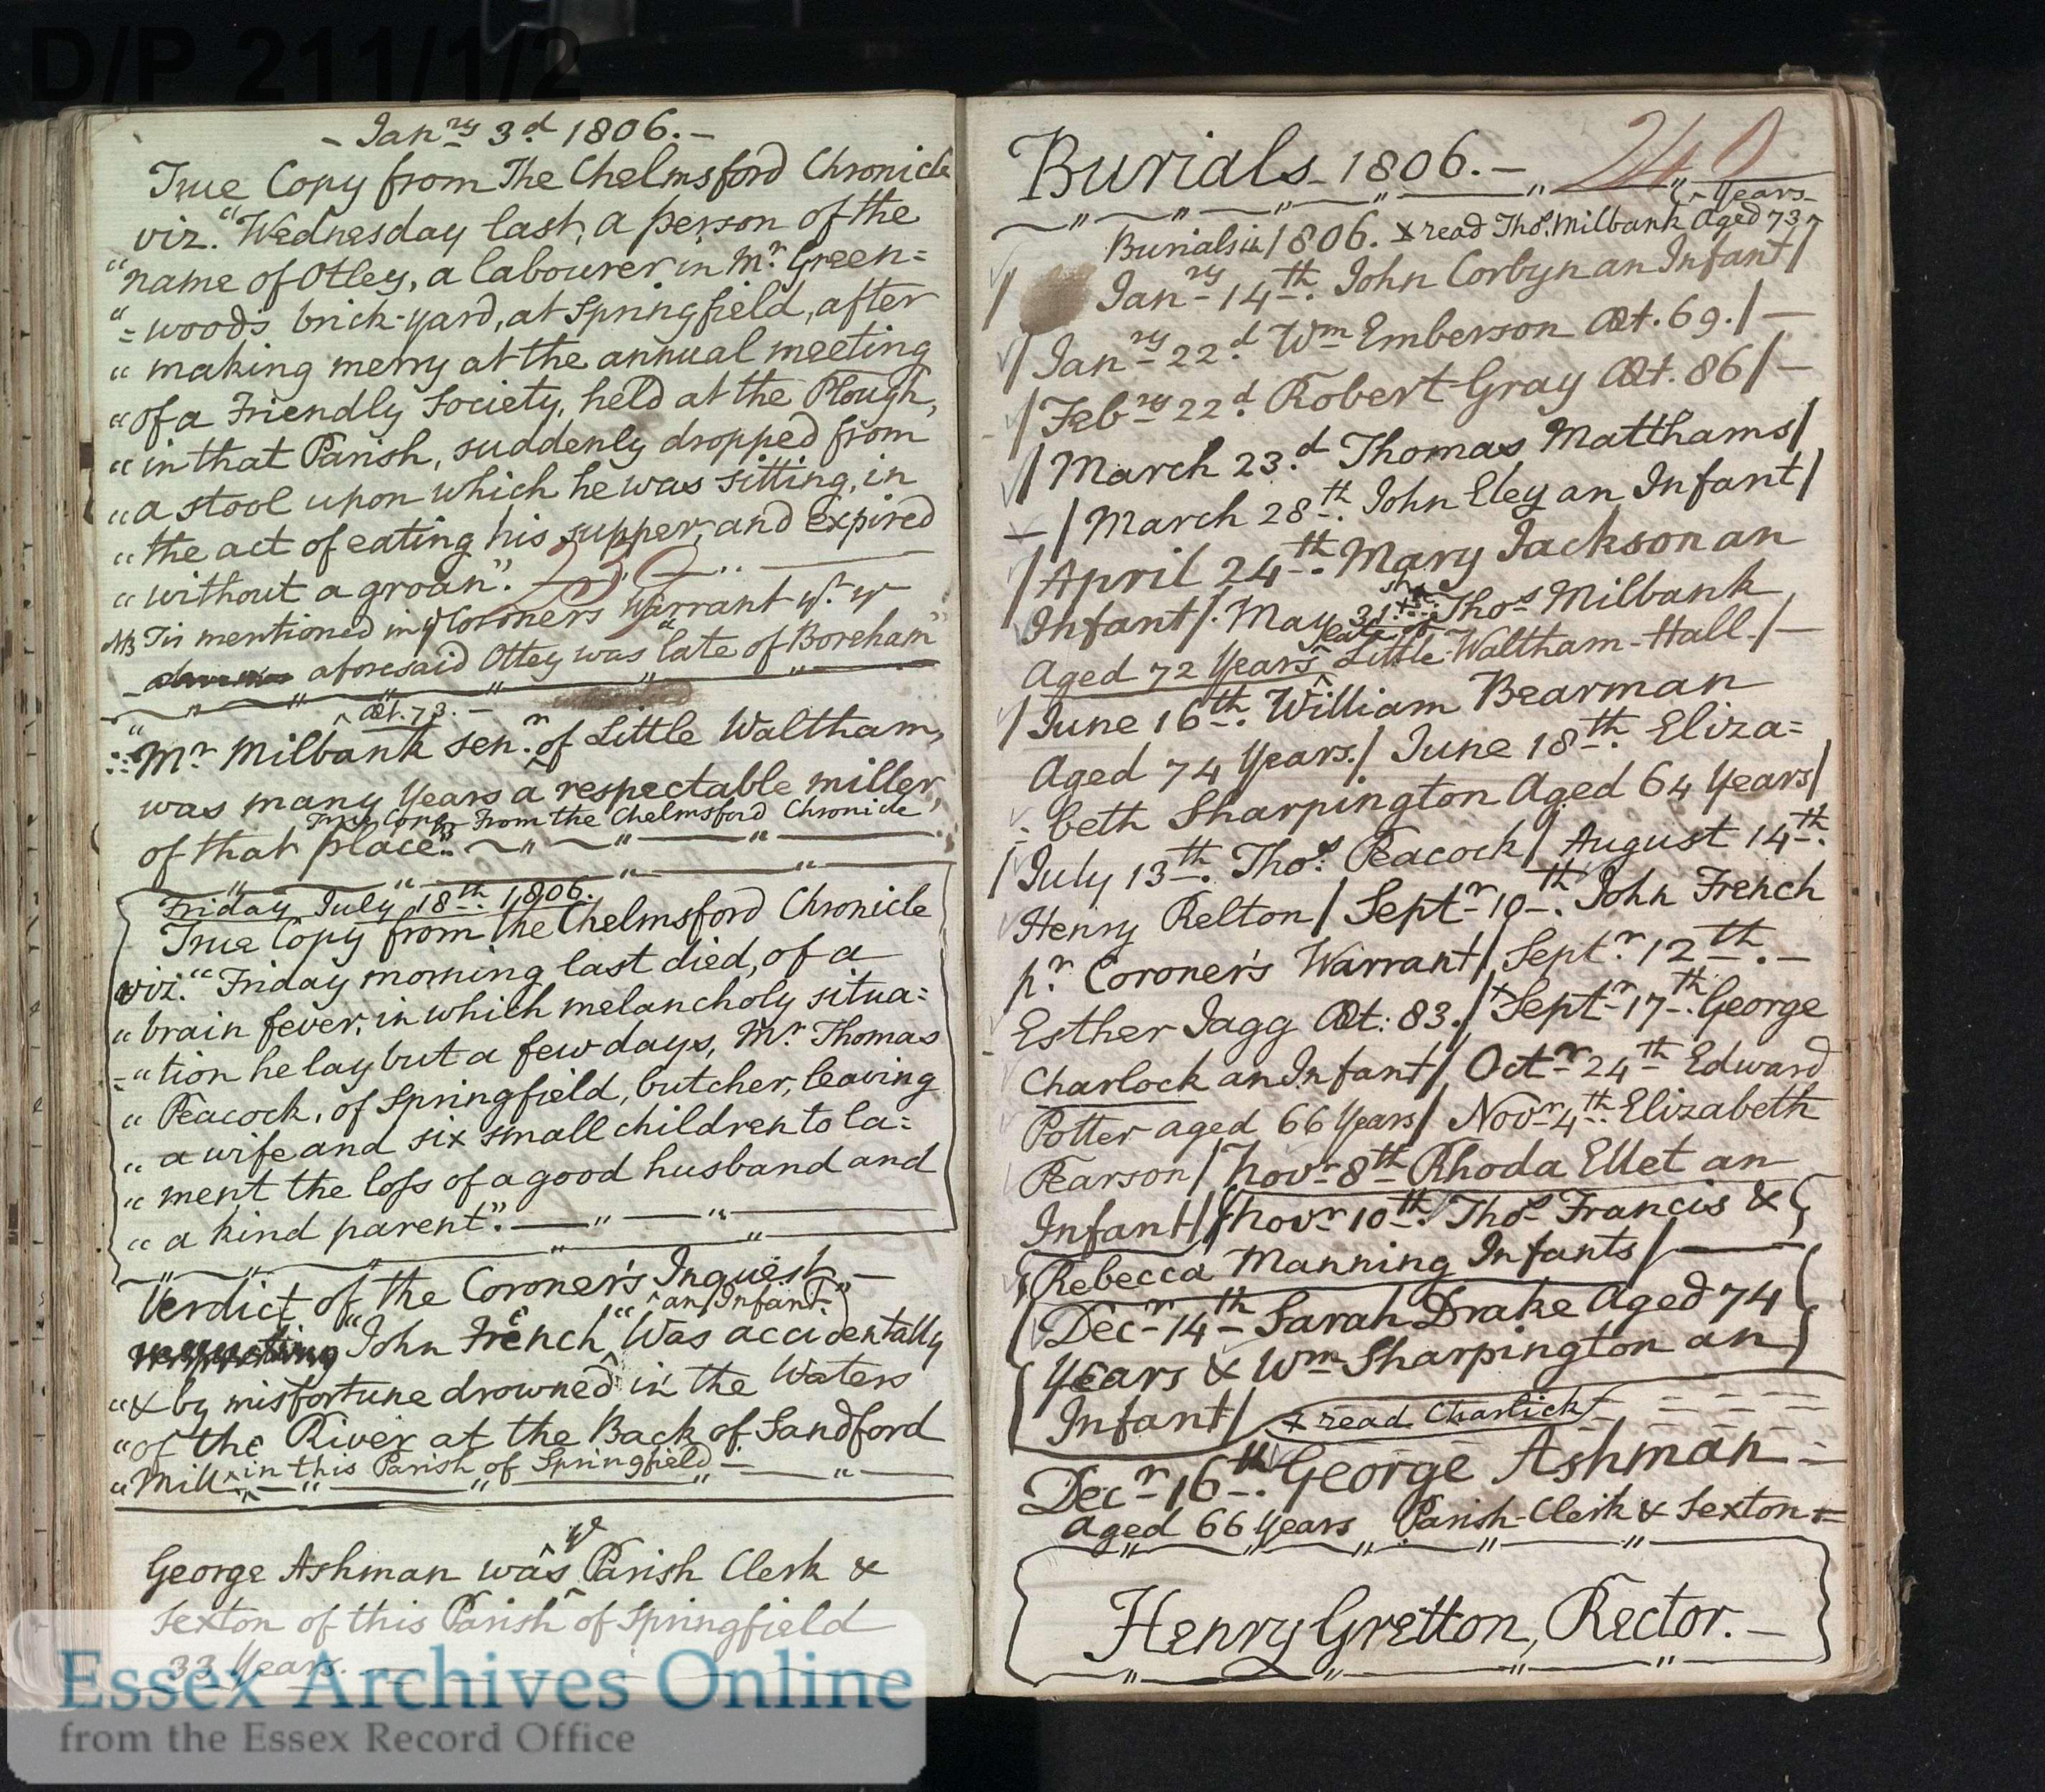 Record of William Bearman’s death in 1805 Springfield, age 74. Springfield had a population of only 875 in 1810: was he a relation of Thomas and family?